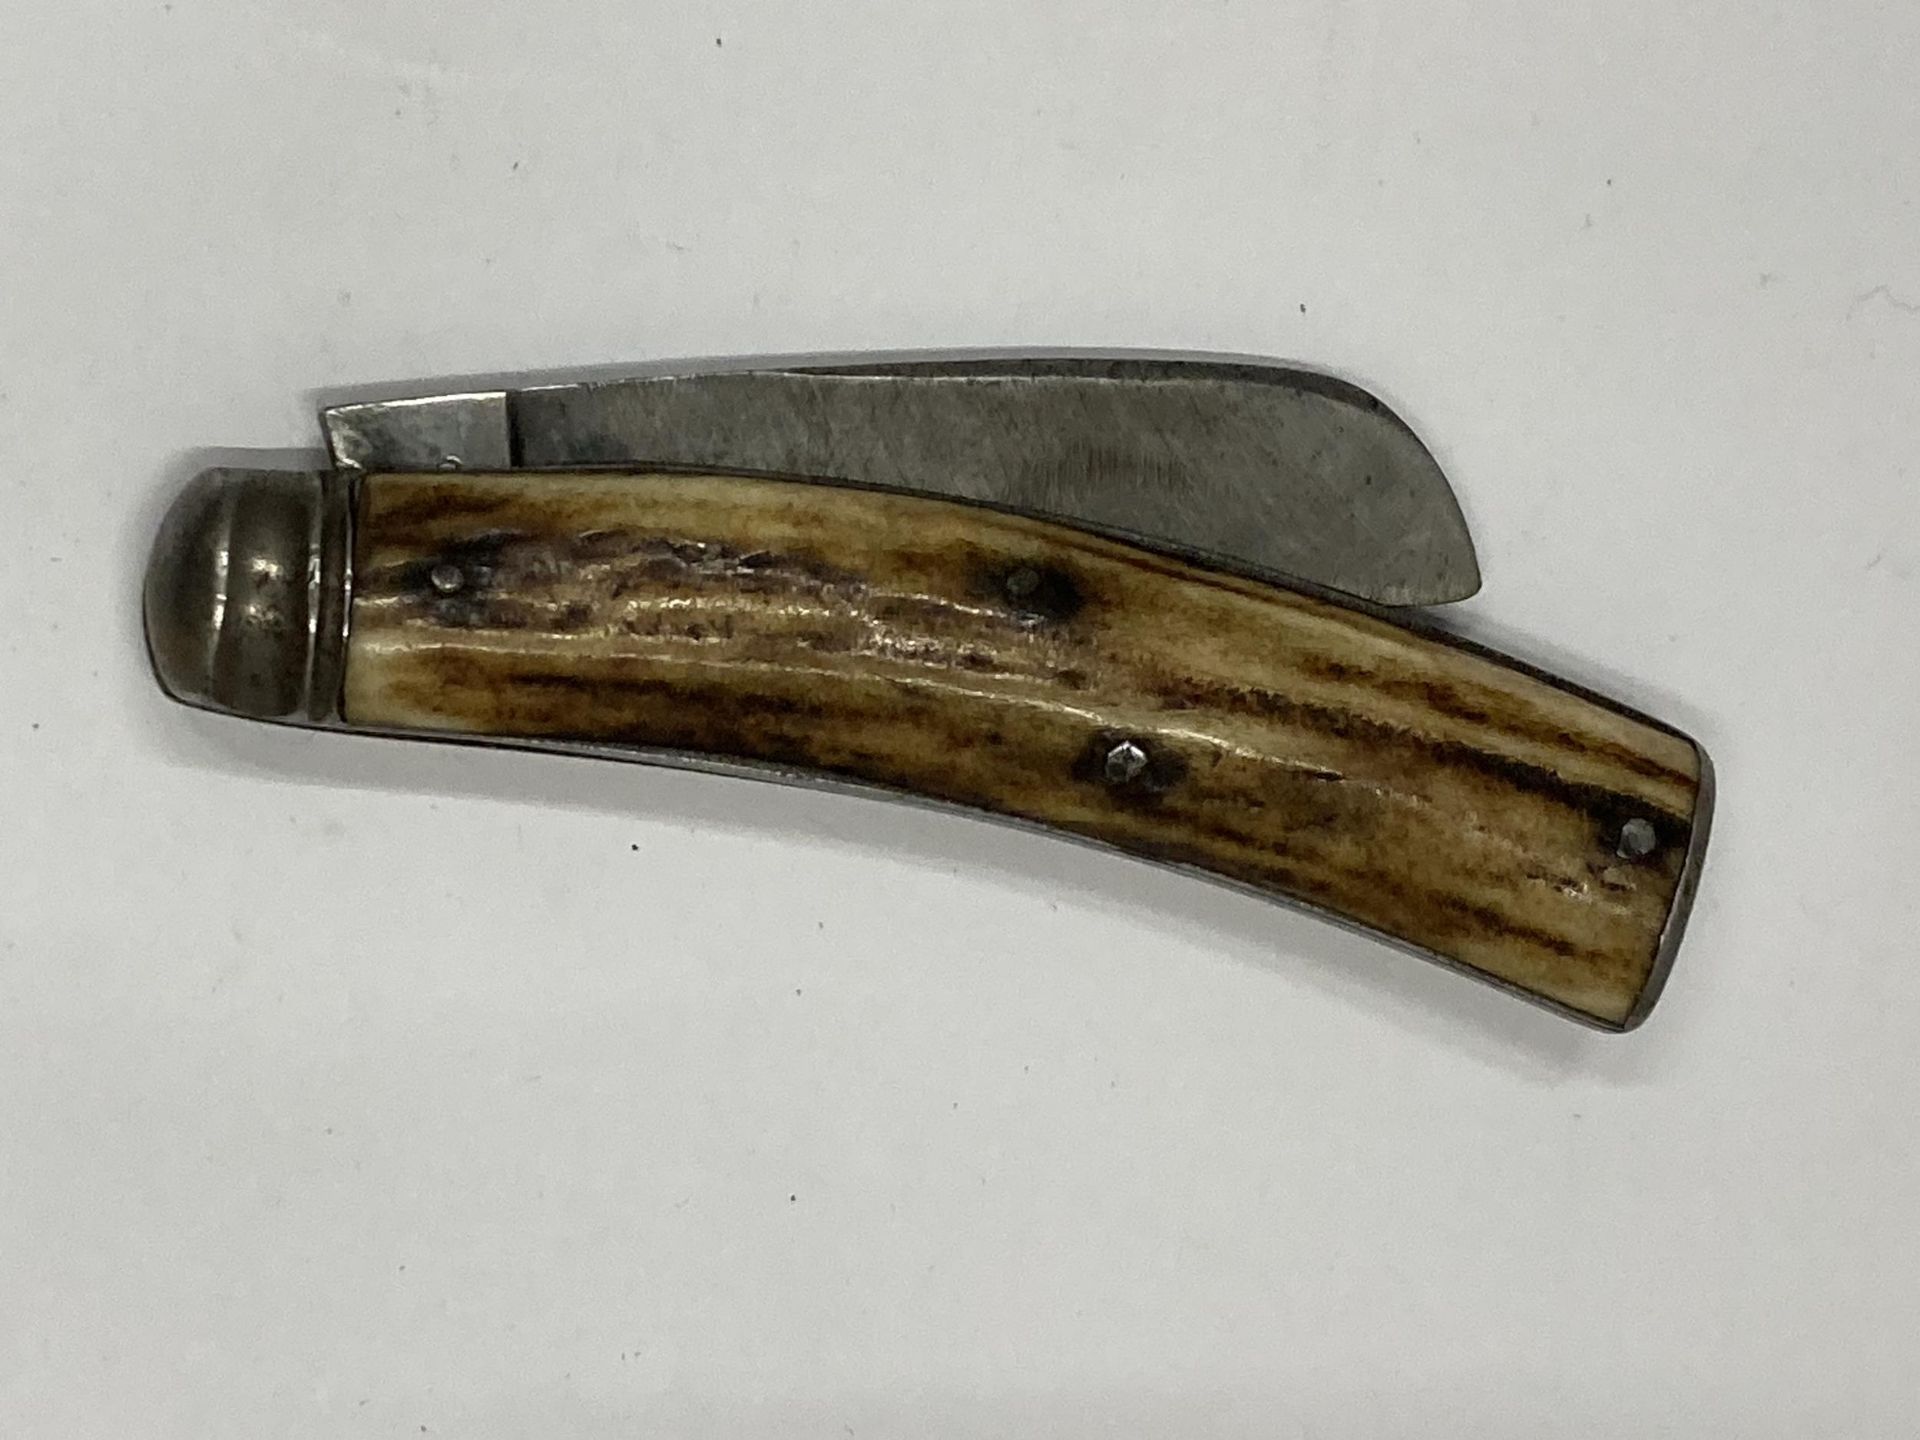 A VINTAGE SAYNOR OF SHEFFIELD PRUNING KNIFE - Image 3 of 3